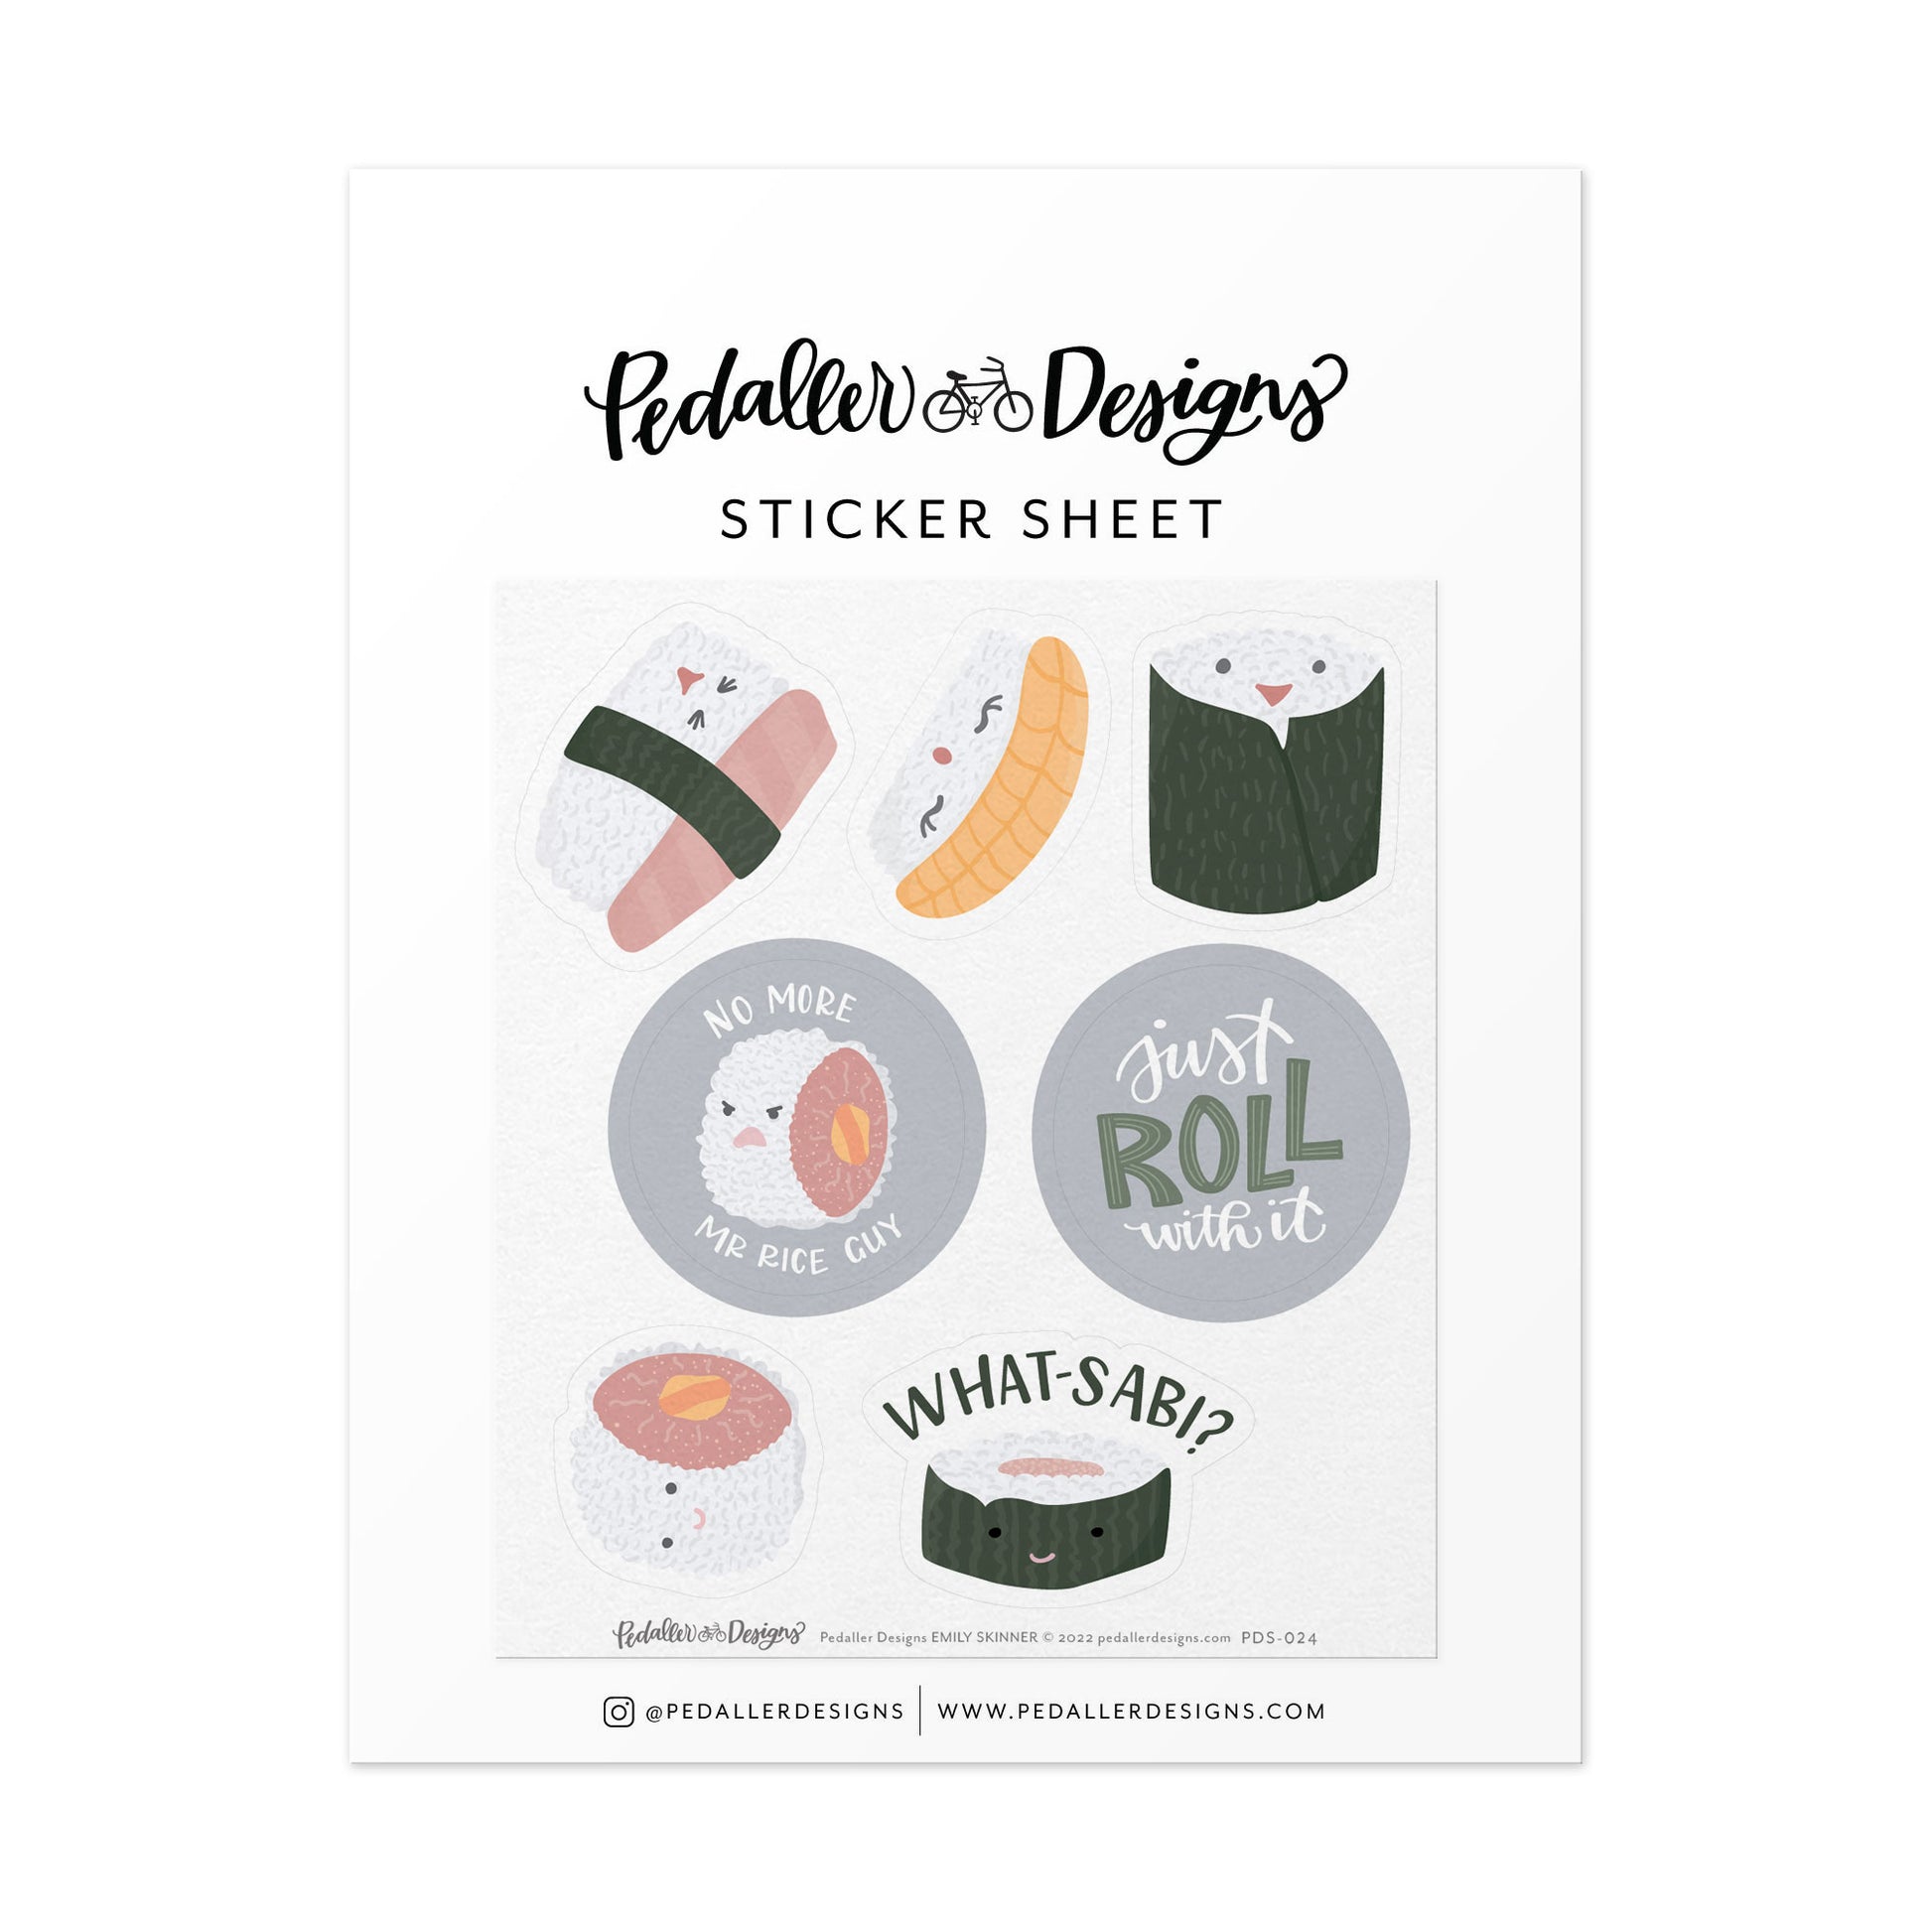 Sushi themed sticker sheet with 7 stickers sized 1.5" to 0.5" of cute kawaii style sushi and punny sayings.